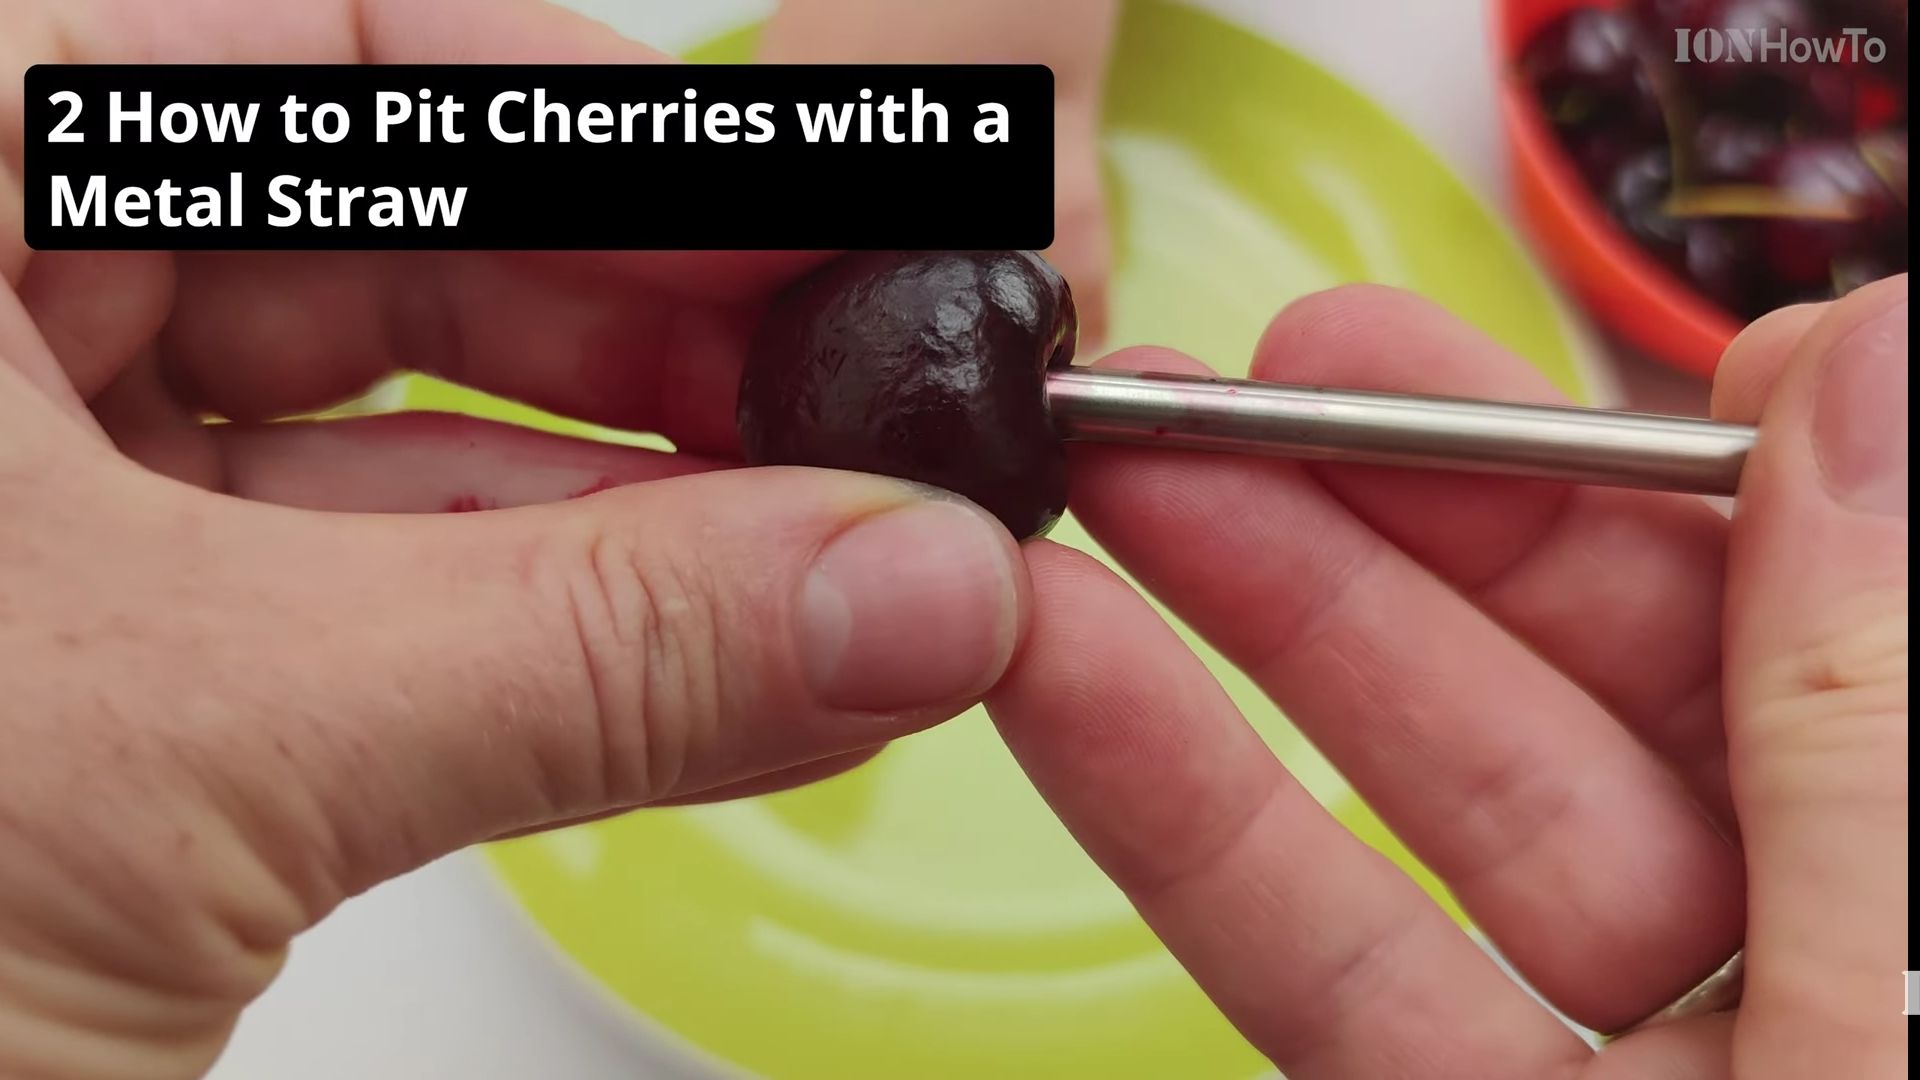 How to pit cherries with a metal straw